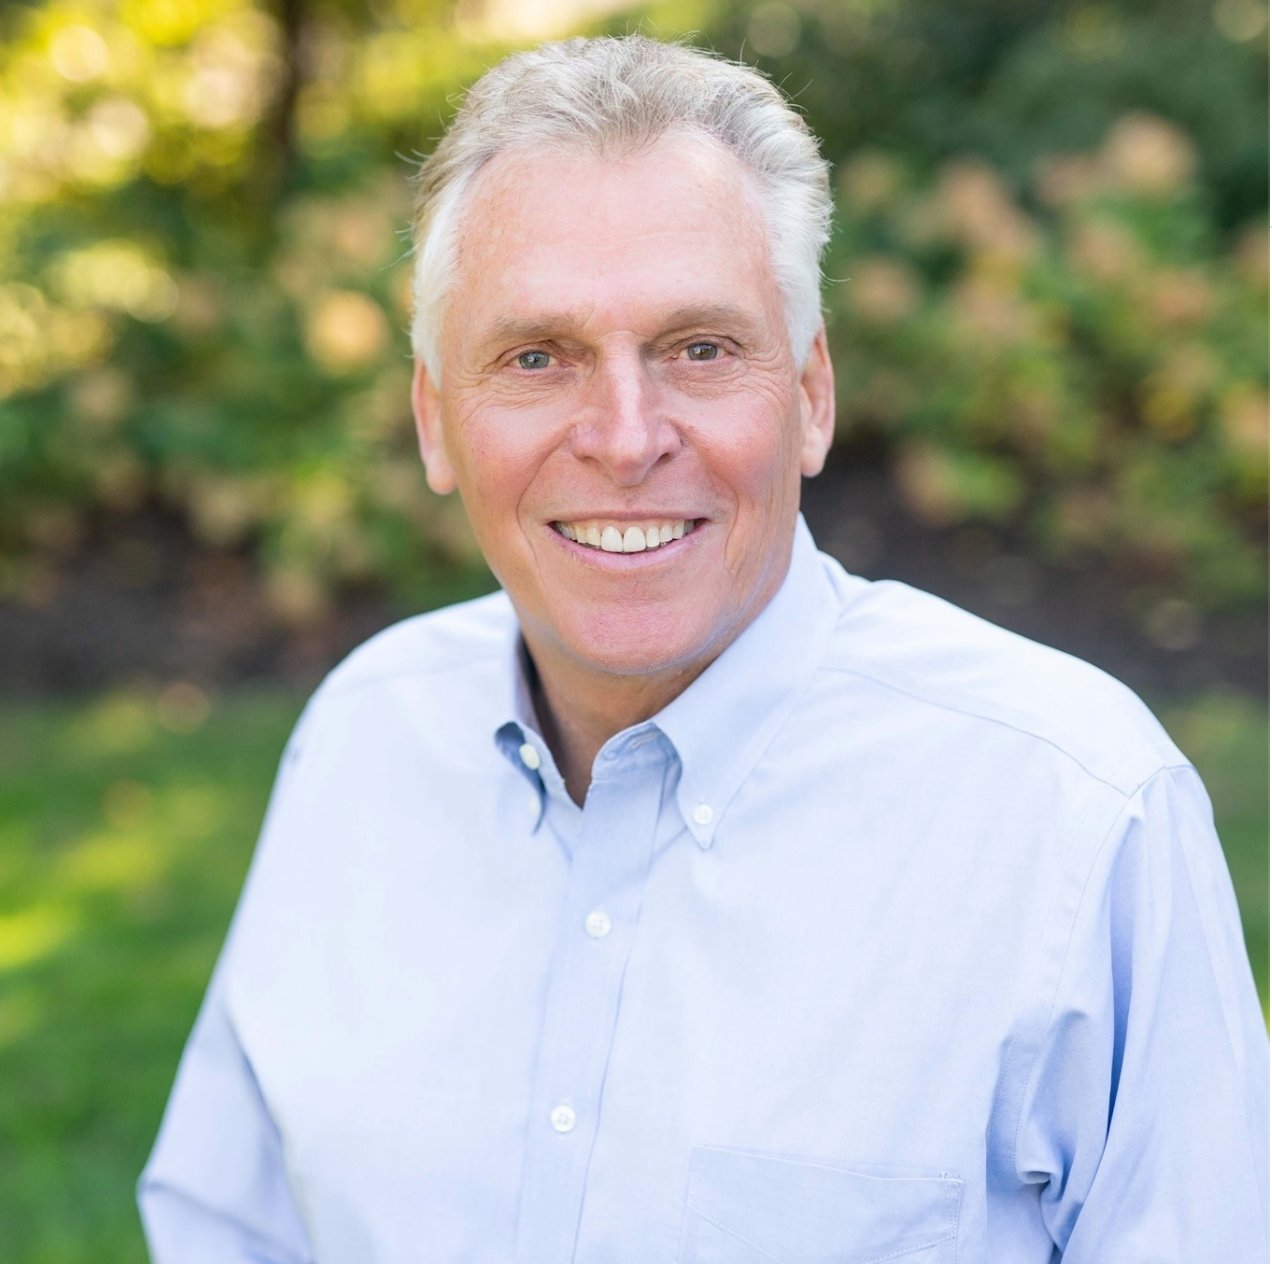 Democratic Gubernatorial Candidate and former Governor Terry McAuliffe